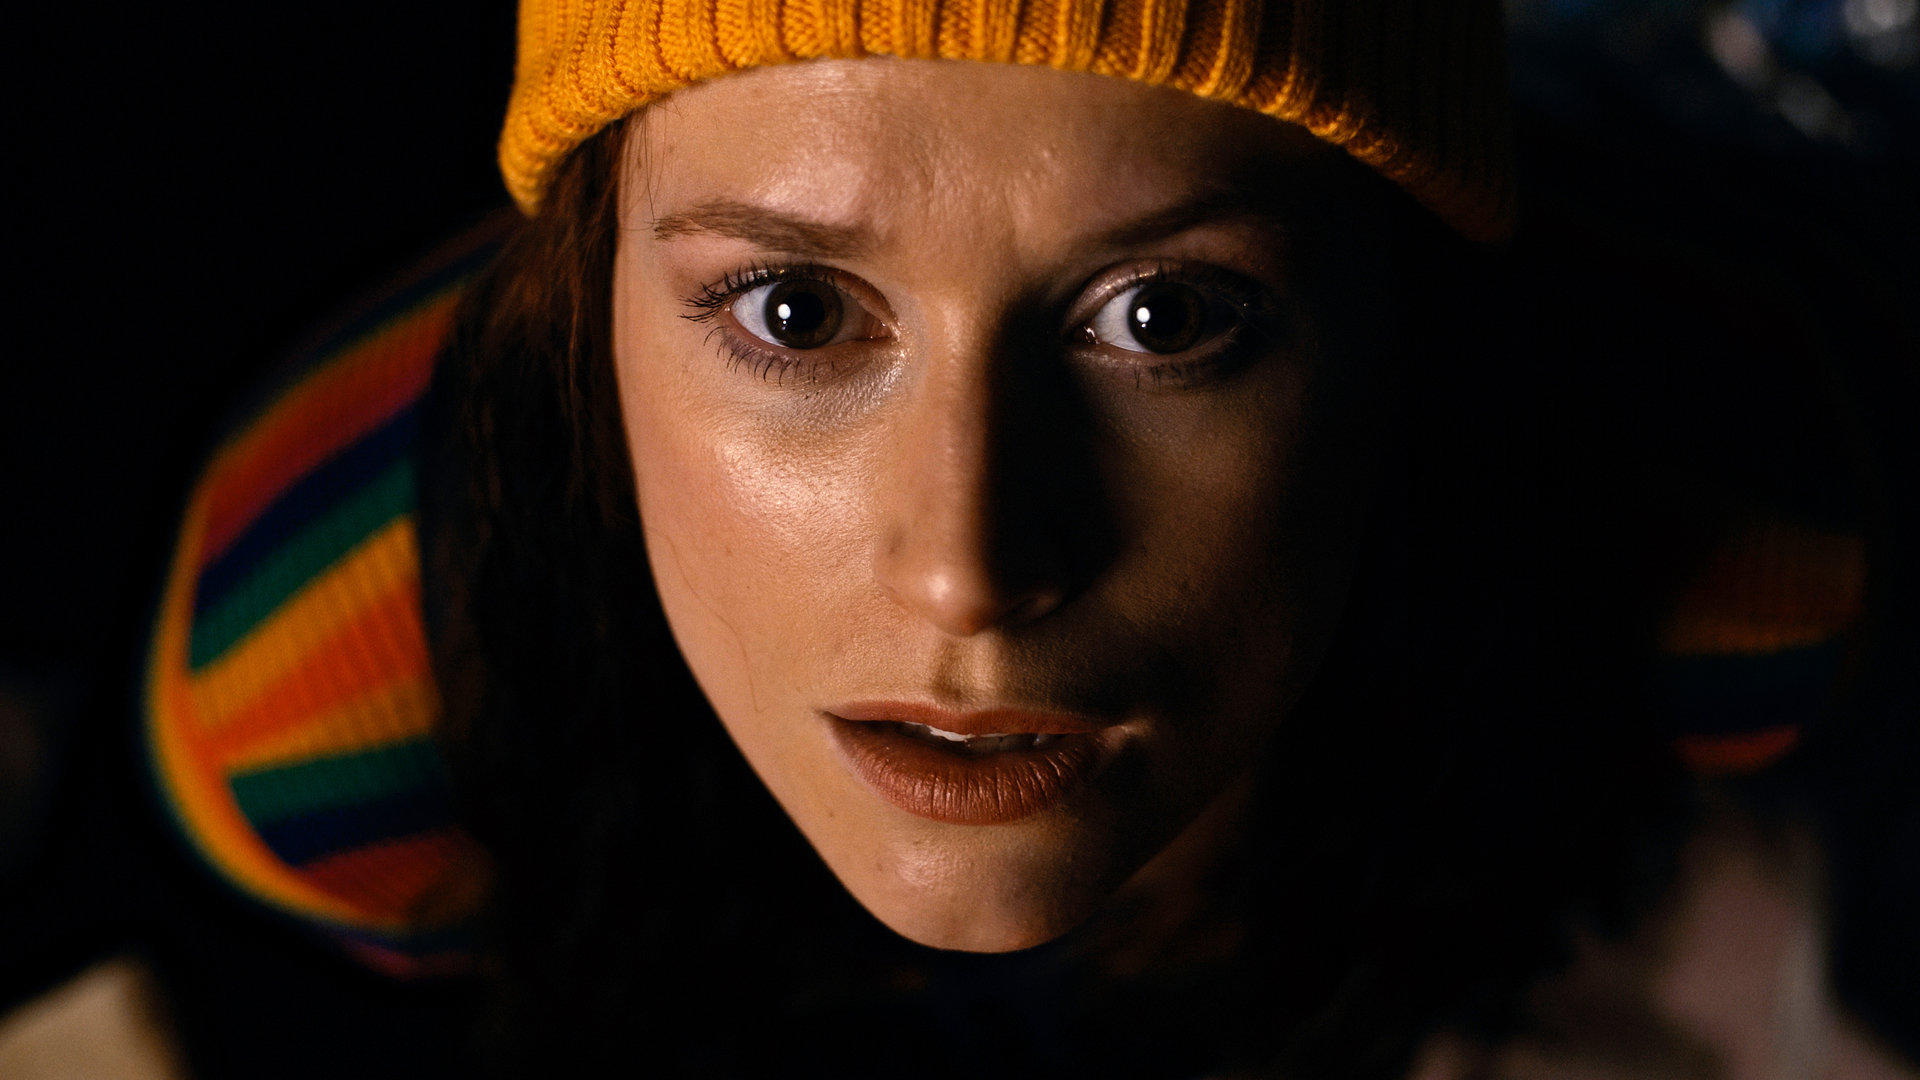 DISSOCIATION. Actor Angela Leta Kaye as the Genealogist. She is a young woman with auburn hair, a yellow beanie, and a rainbow long-sleeve shirt. In this image, she stares directly at the camera, in horror of what she's seeing off-screen.